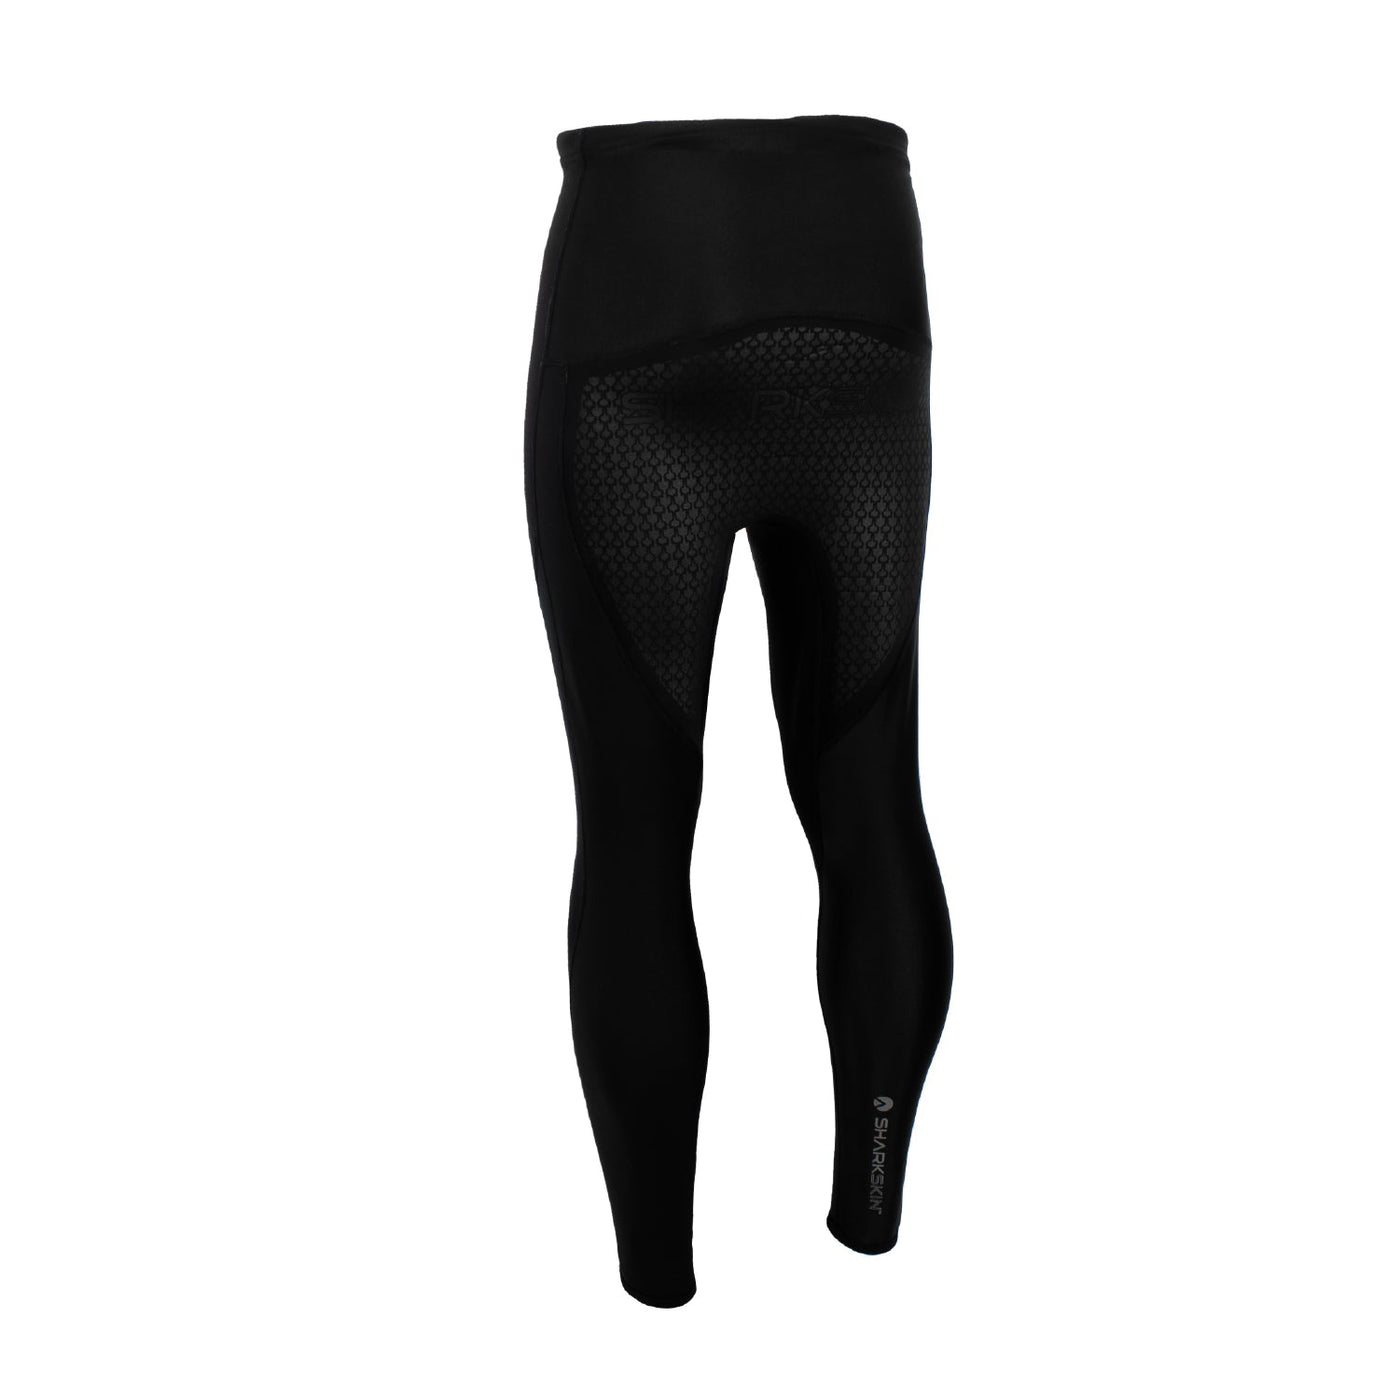 Performance Long Pants Chillproof (Male)